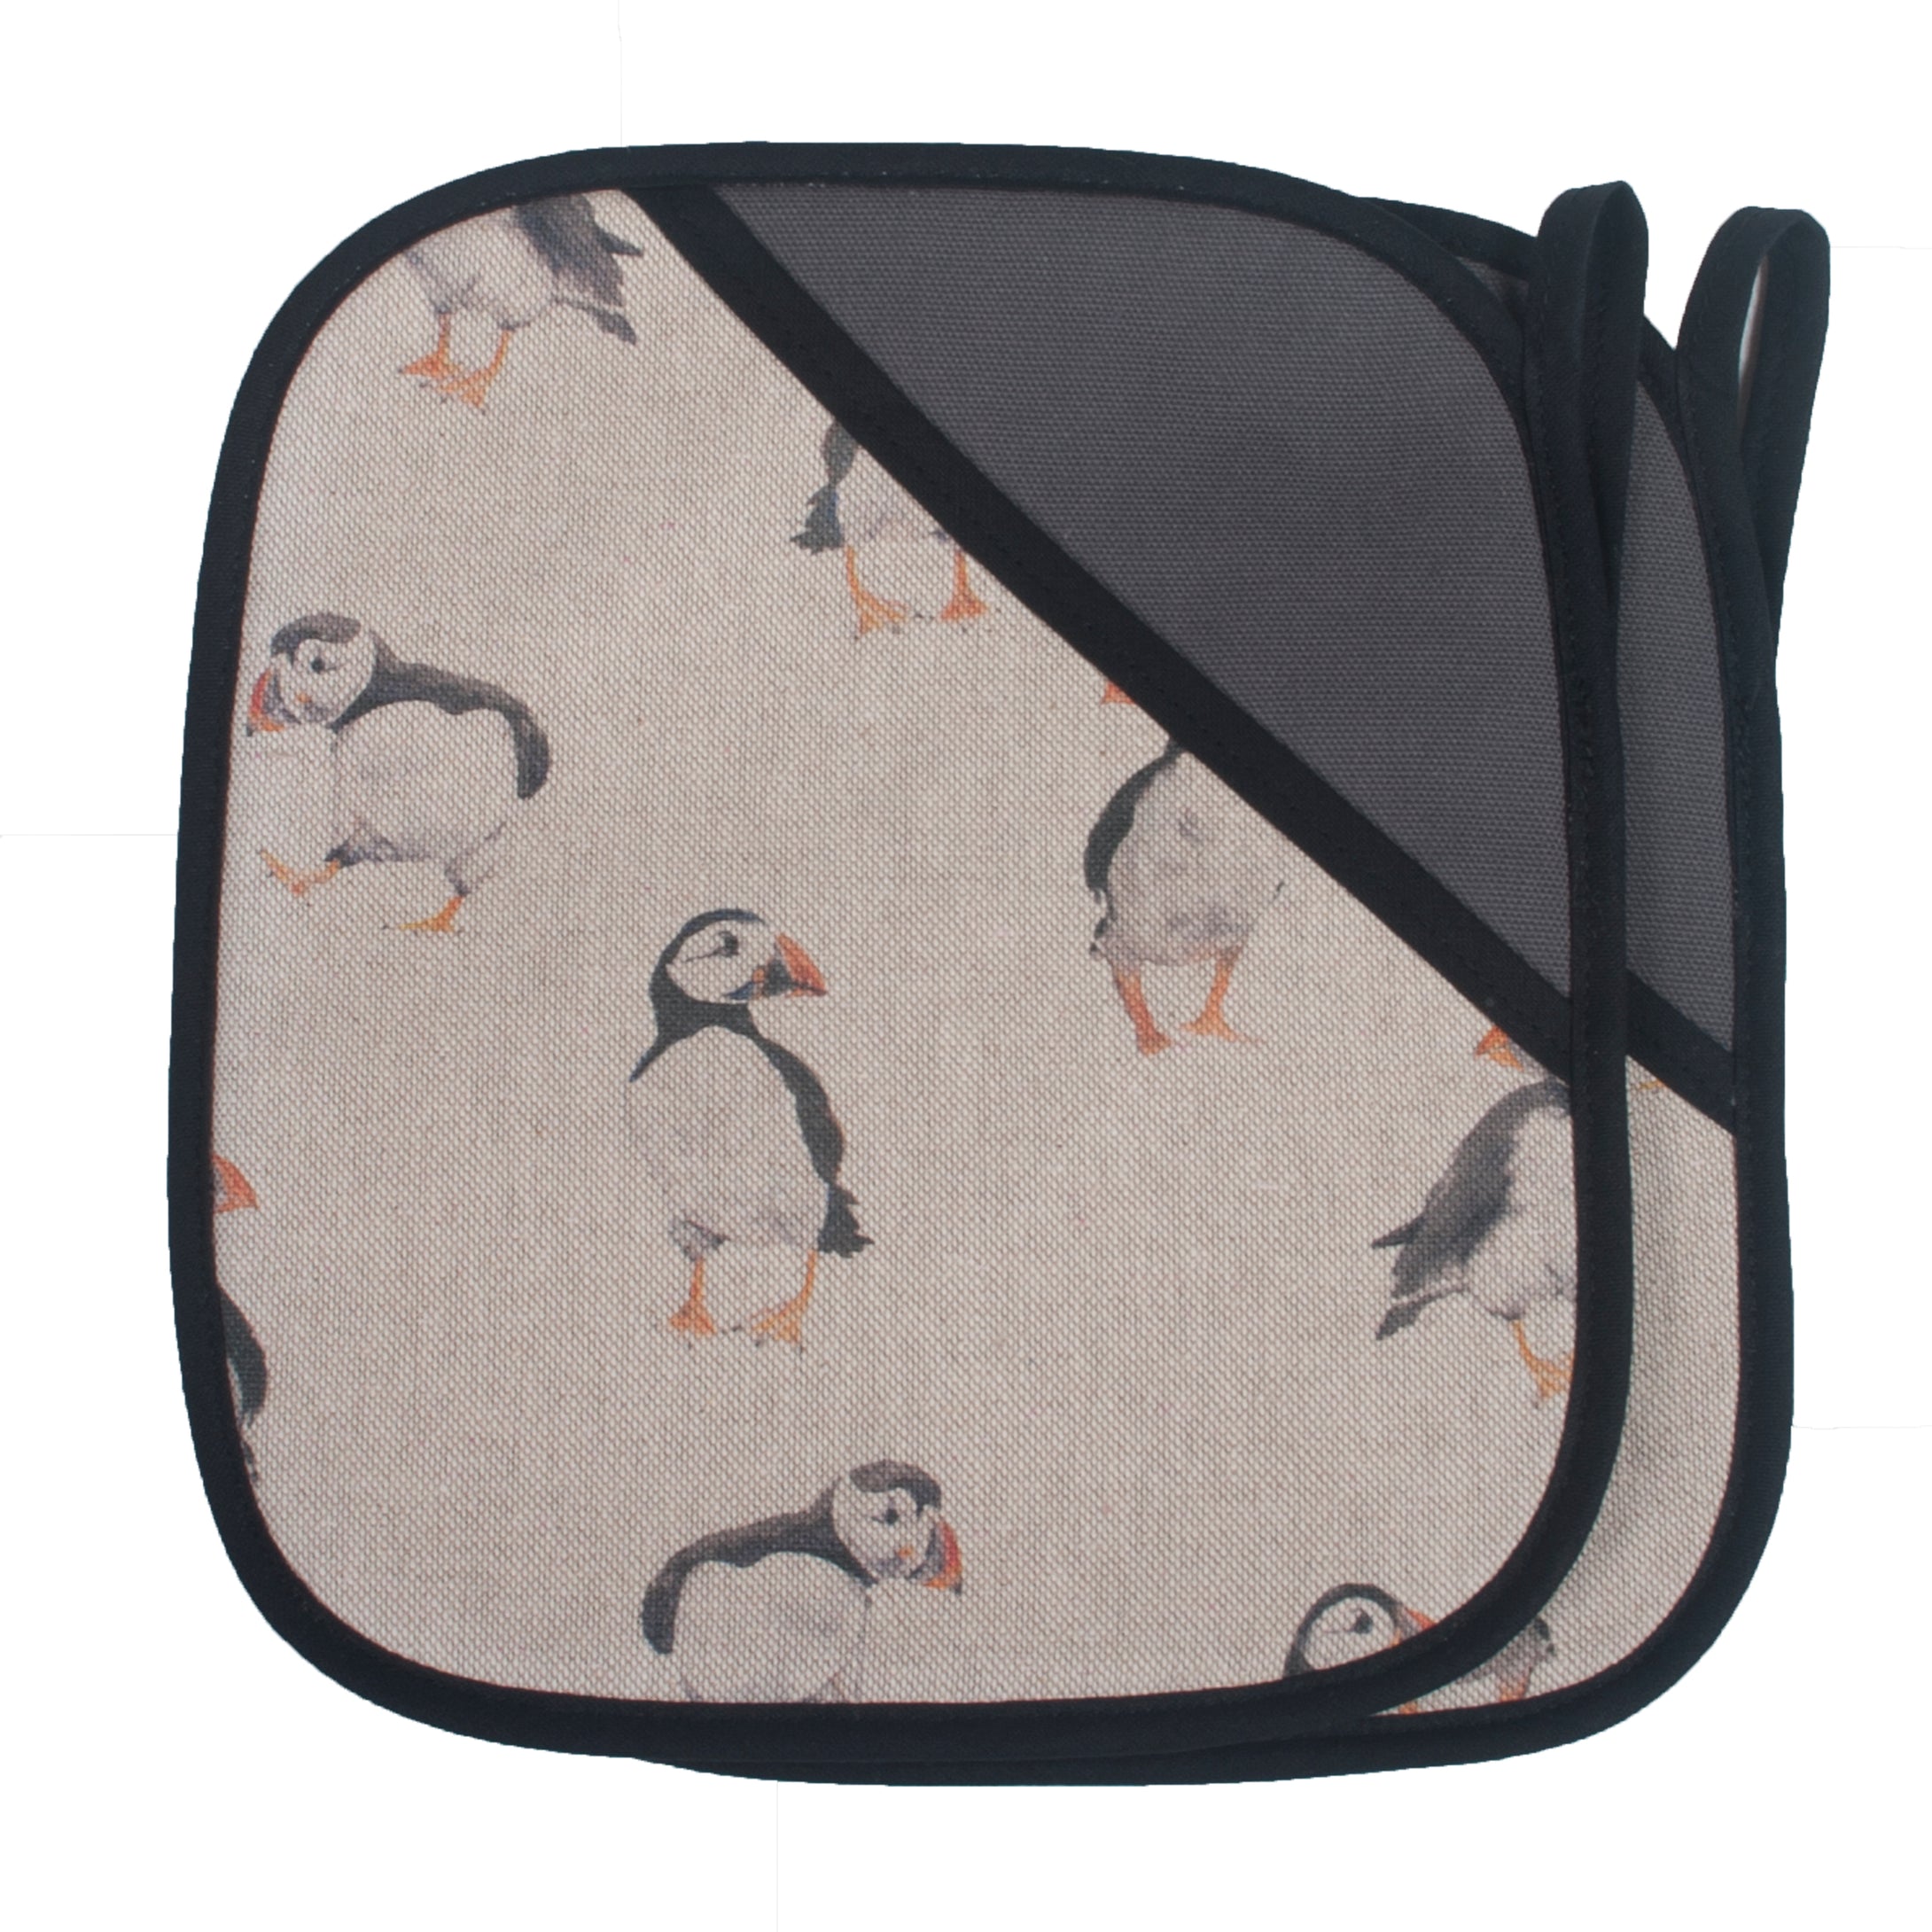 Oven Grippers, Puffin (Pair)